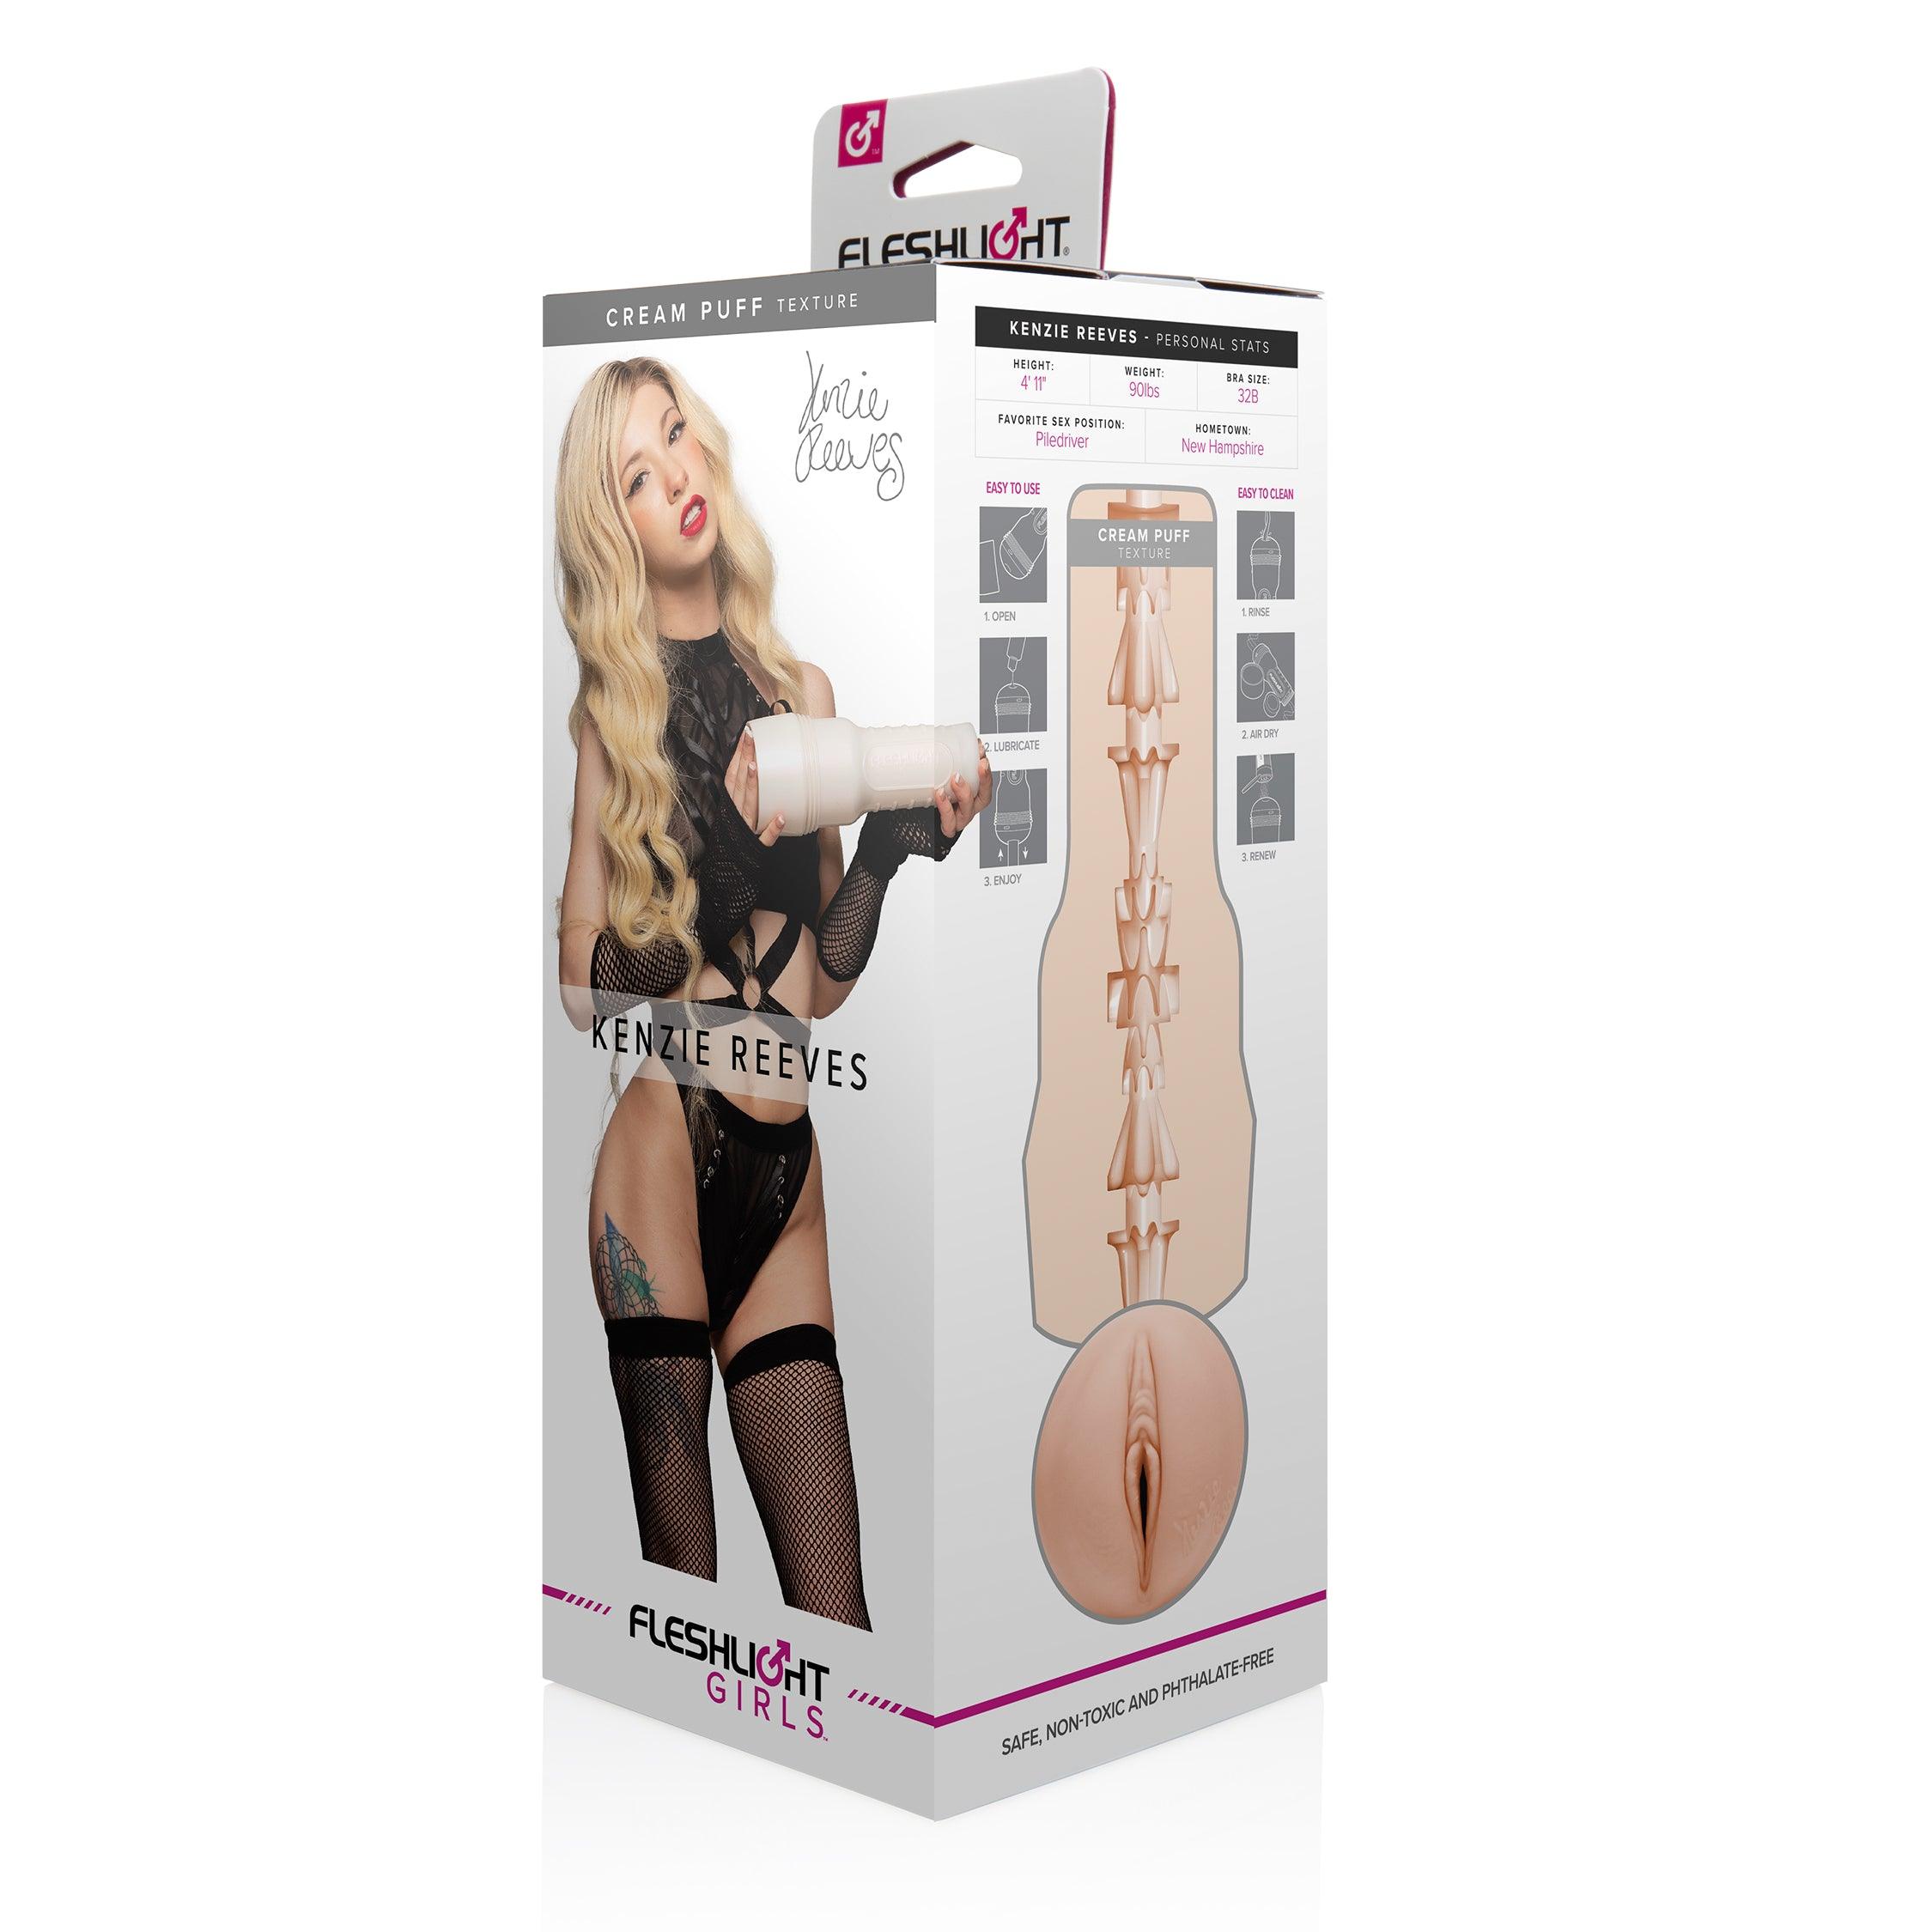 Fleshlight Girls Kenzie Reeves Cream Puff - Buy At Luxury Toy X - Free 3-Day Shipping